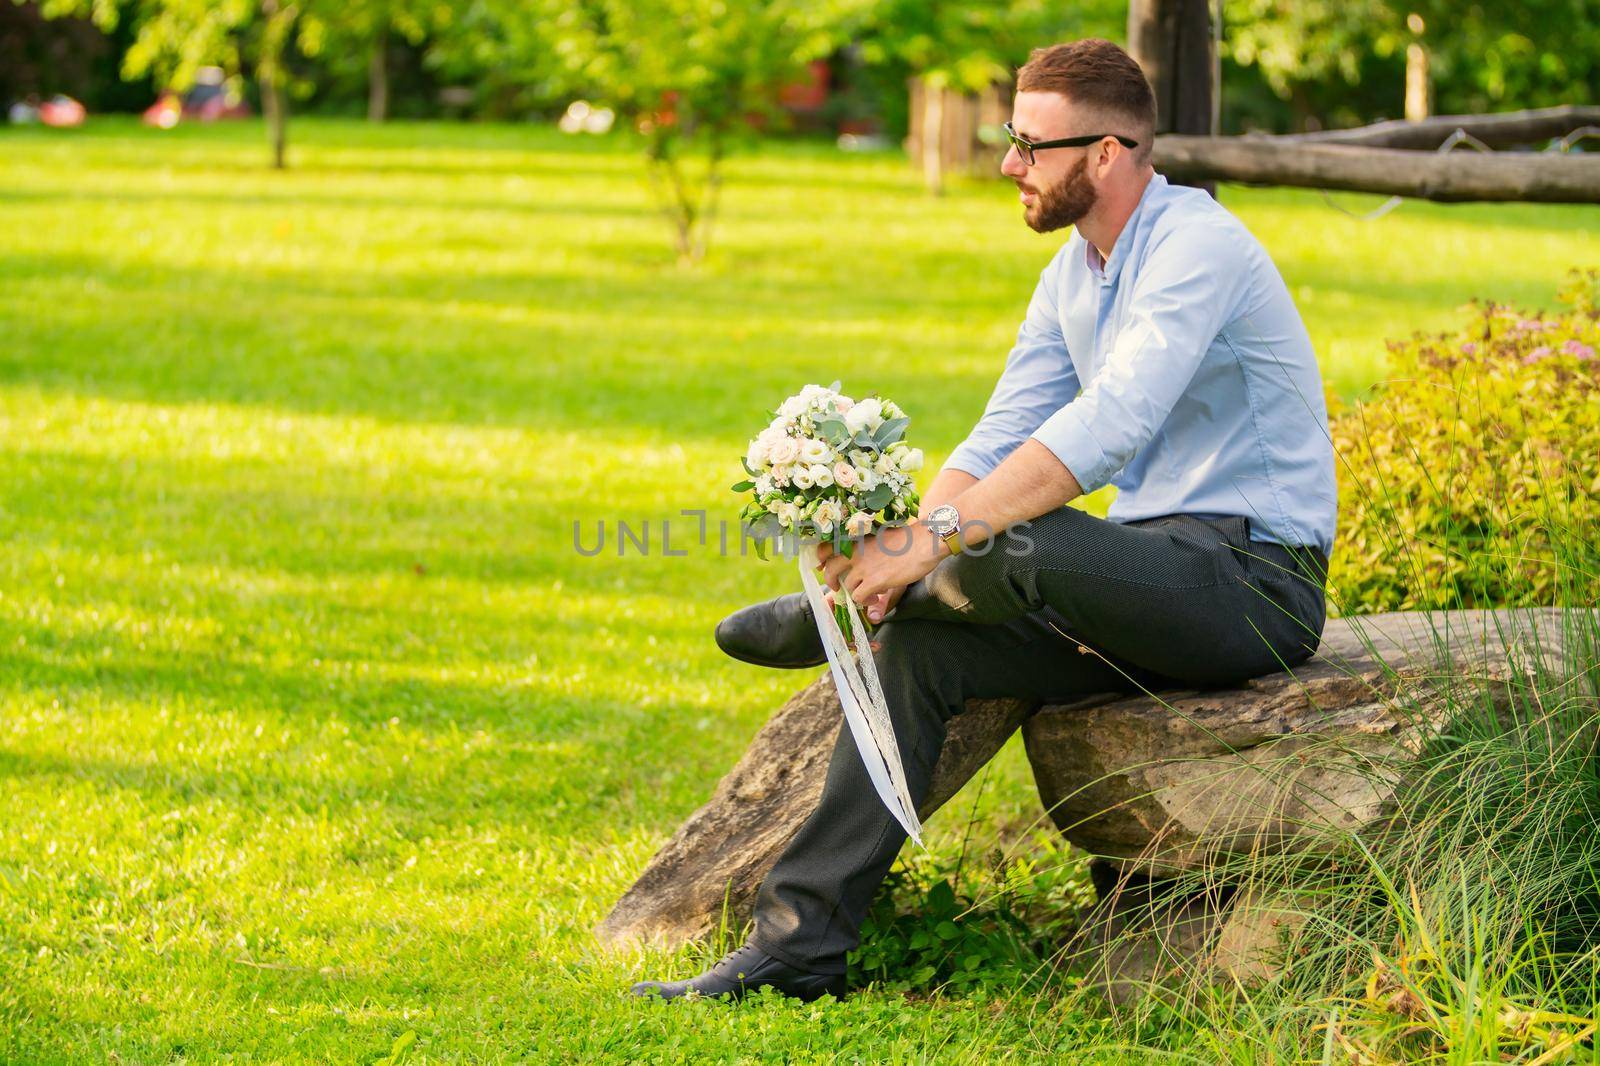 guy with a wedding bouquet by zokov